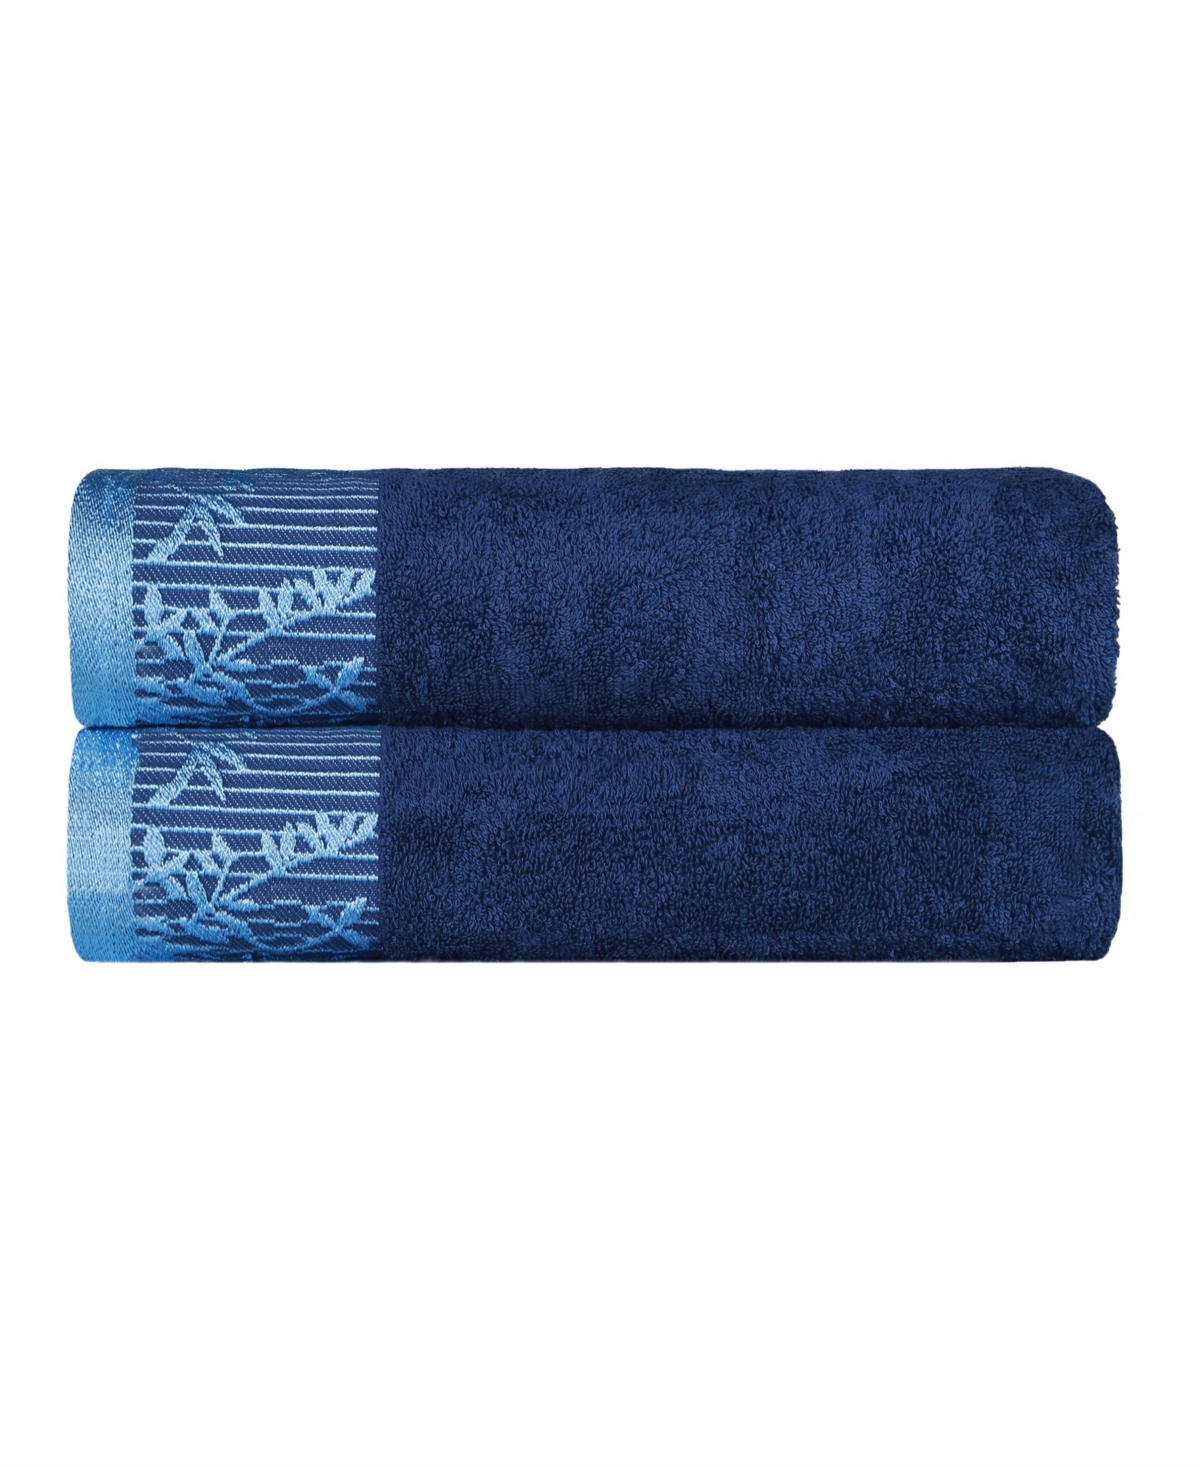 Superior Wisteria Floral Embroidered Jacquard Border Cotton Bath Towel Set, 2 Pieces In Navy Blue